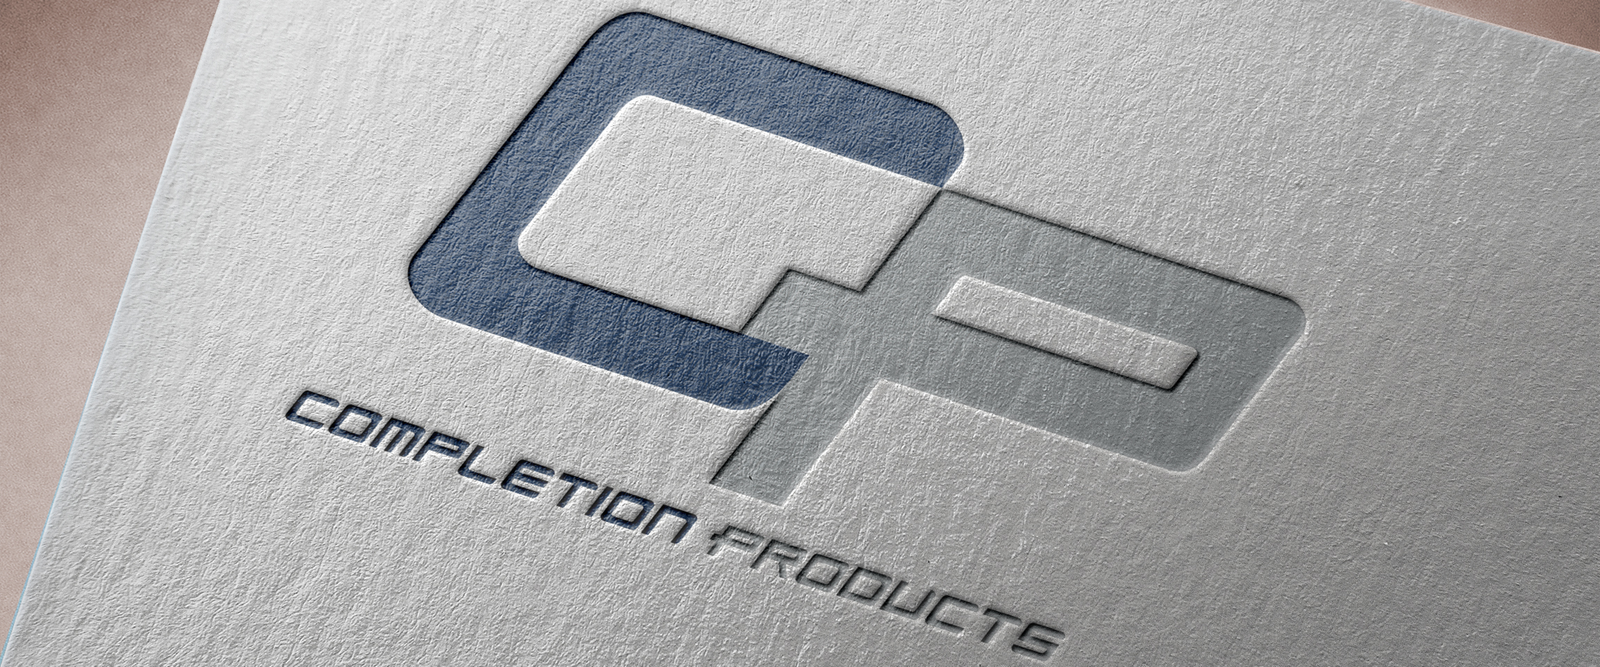 Completion Products singapore logo restyle design